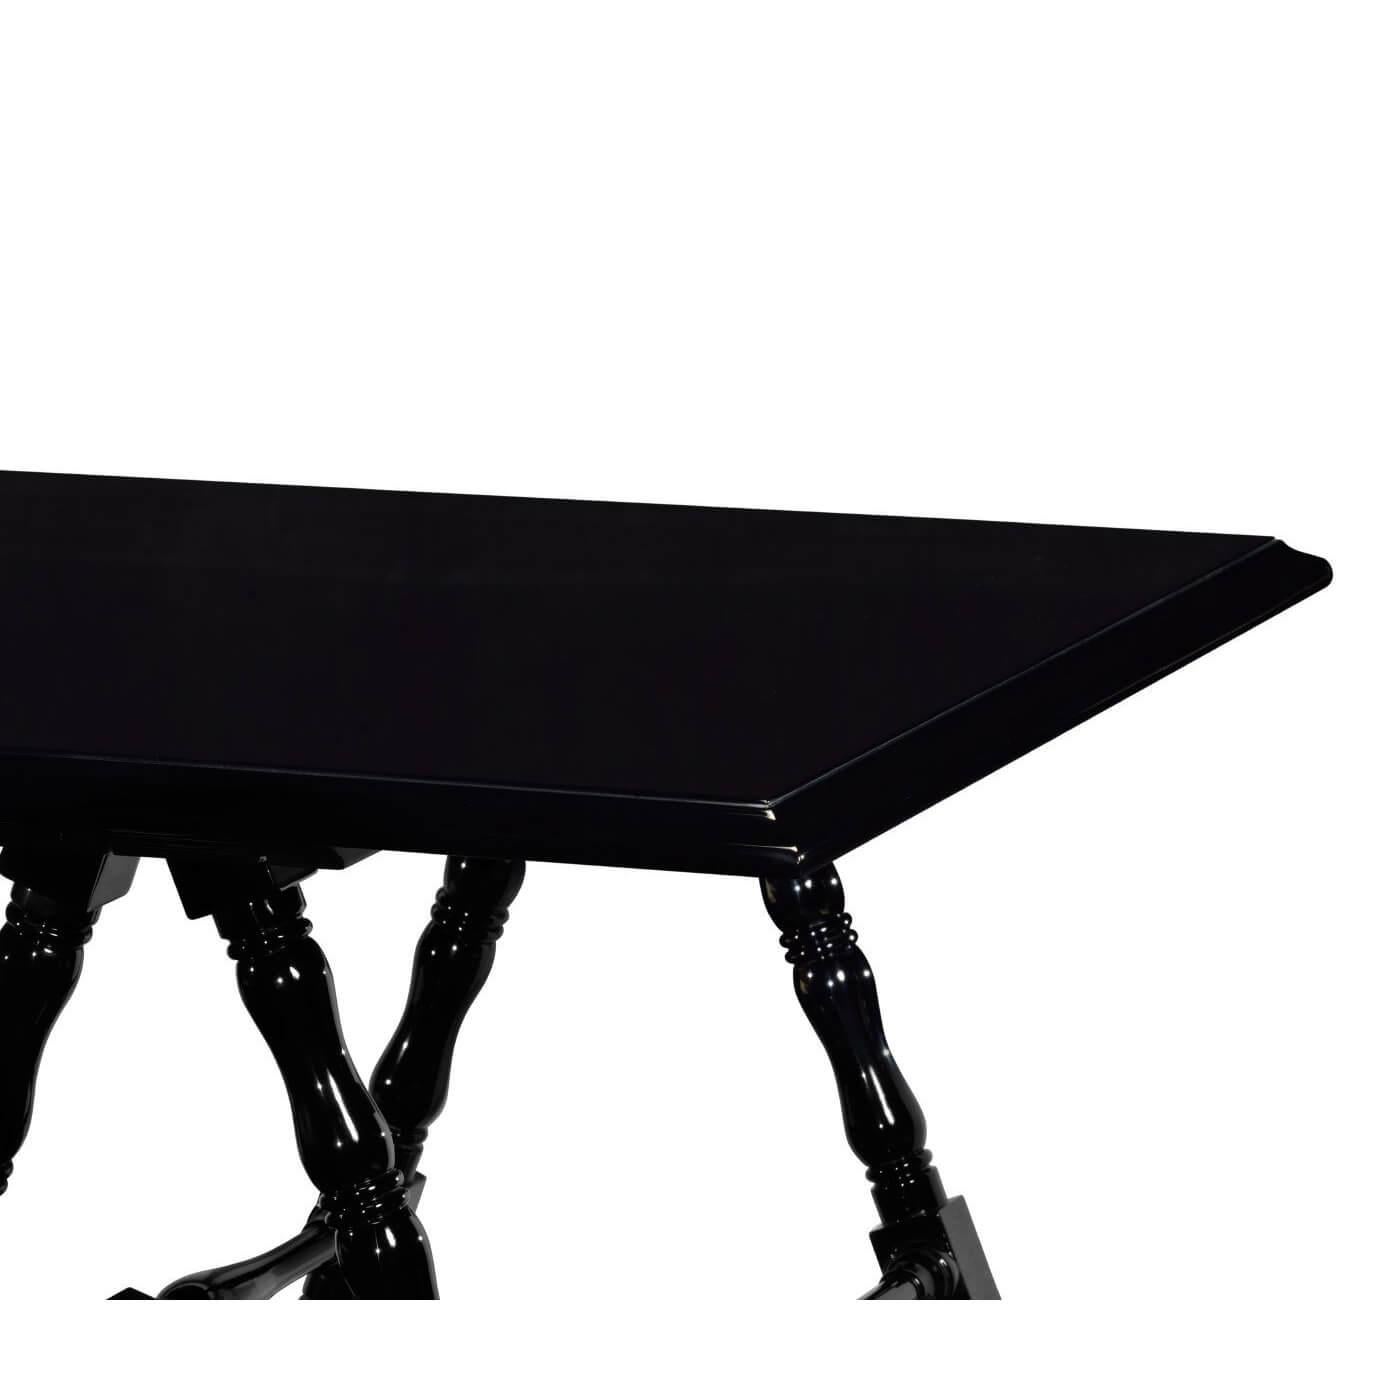 A French Louis Philippe style black lacquered and polished desk with campaign-style X frame supports, each with turned legs and stretchers on brass feet.

Dimensions: 84